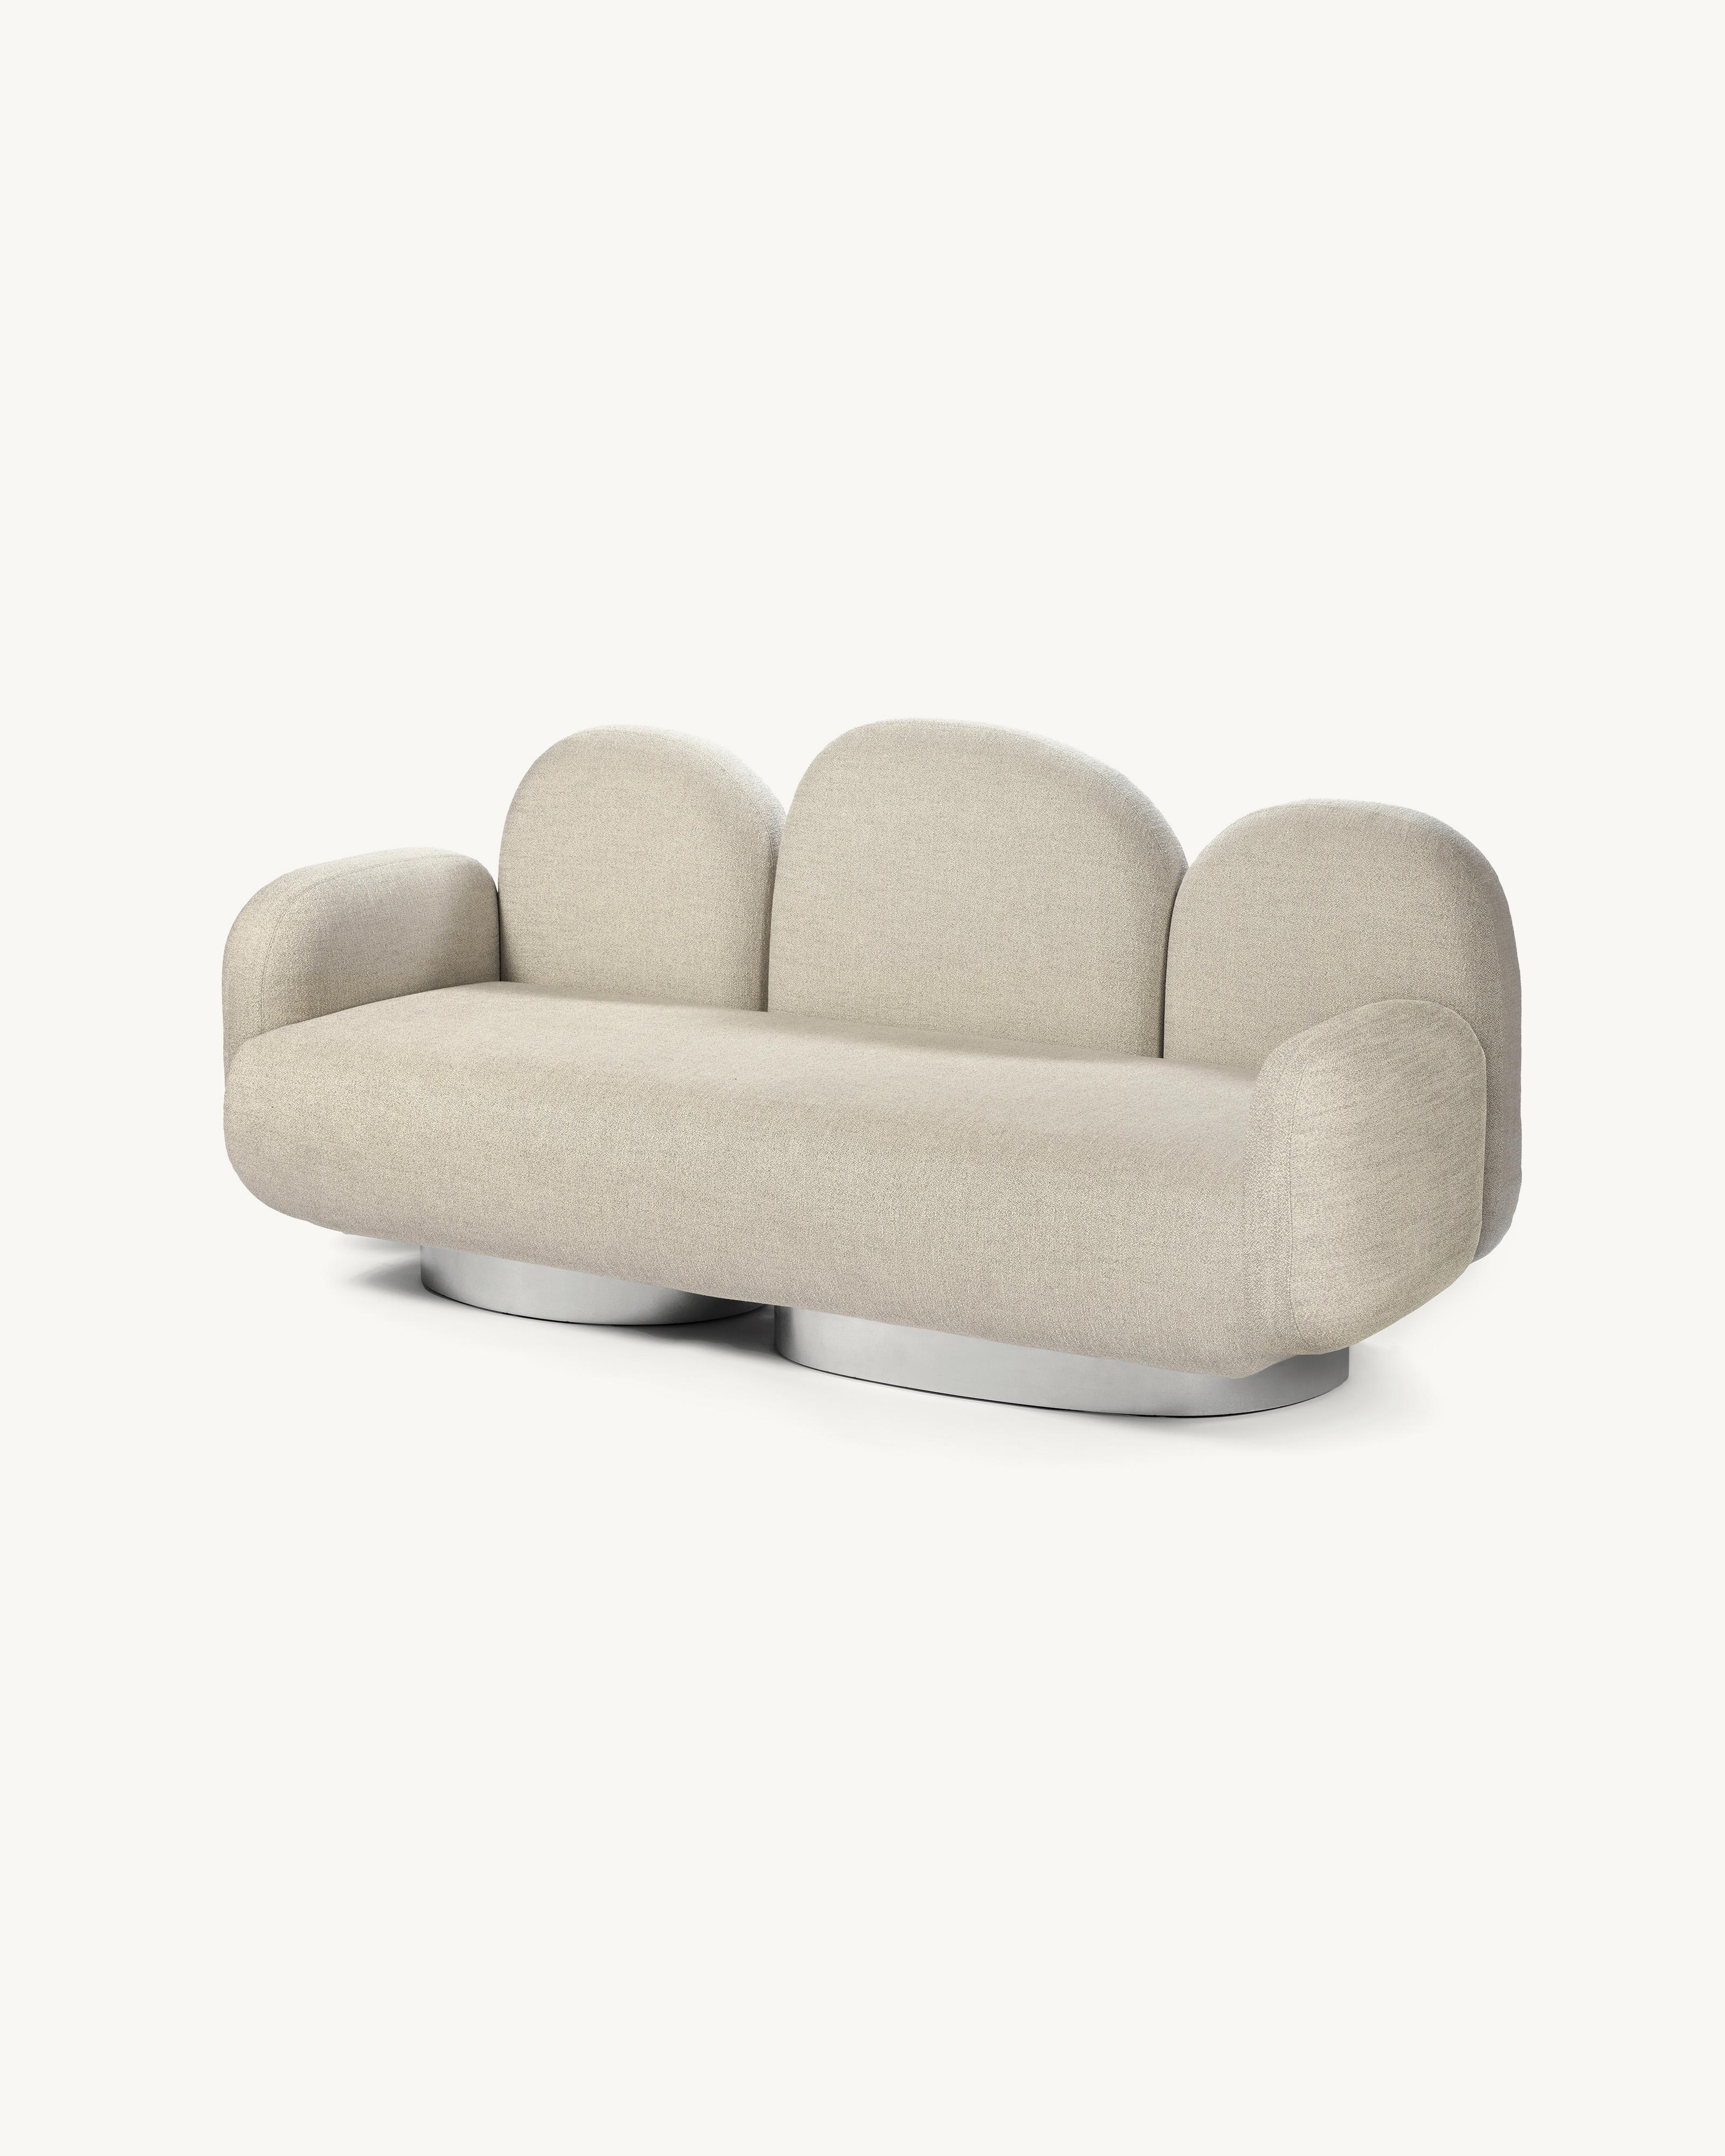 Contemporary Sofa 'Assemble' by Destroyers/Builders, 2 seaters + 2 armrests In New Condition For Sale In Paris, FR